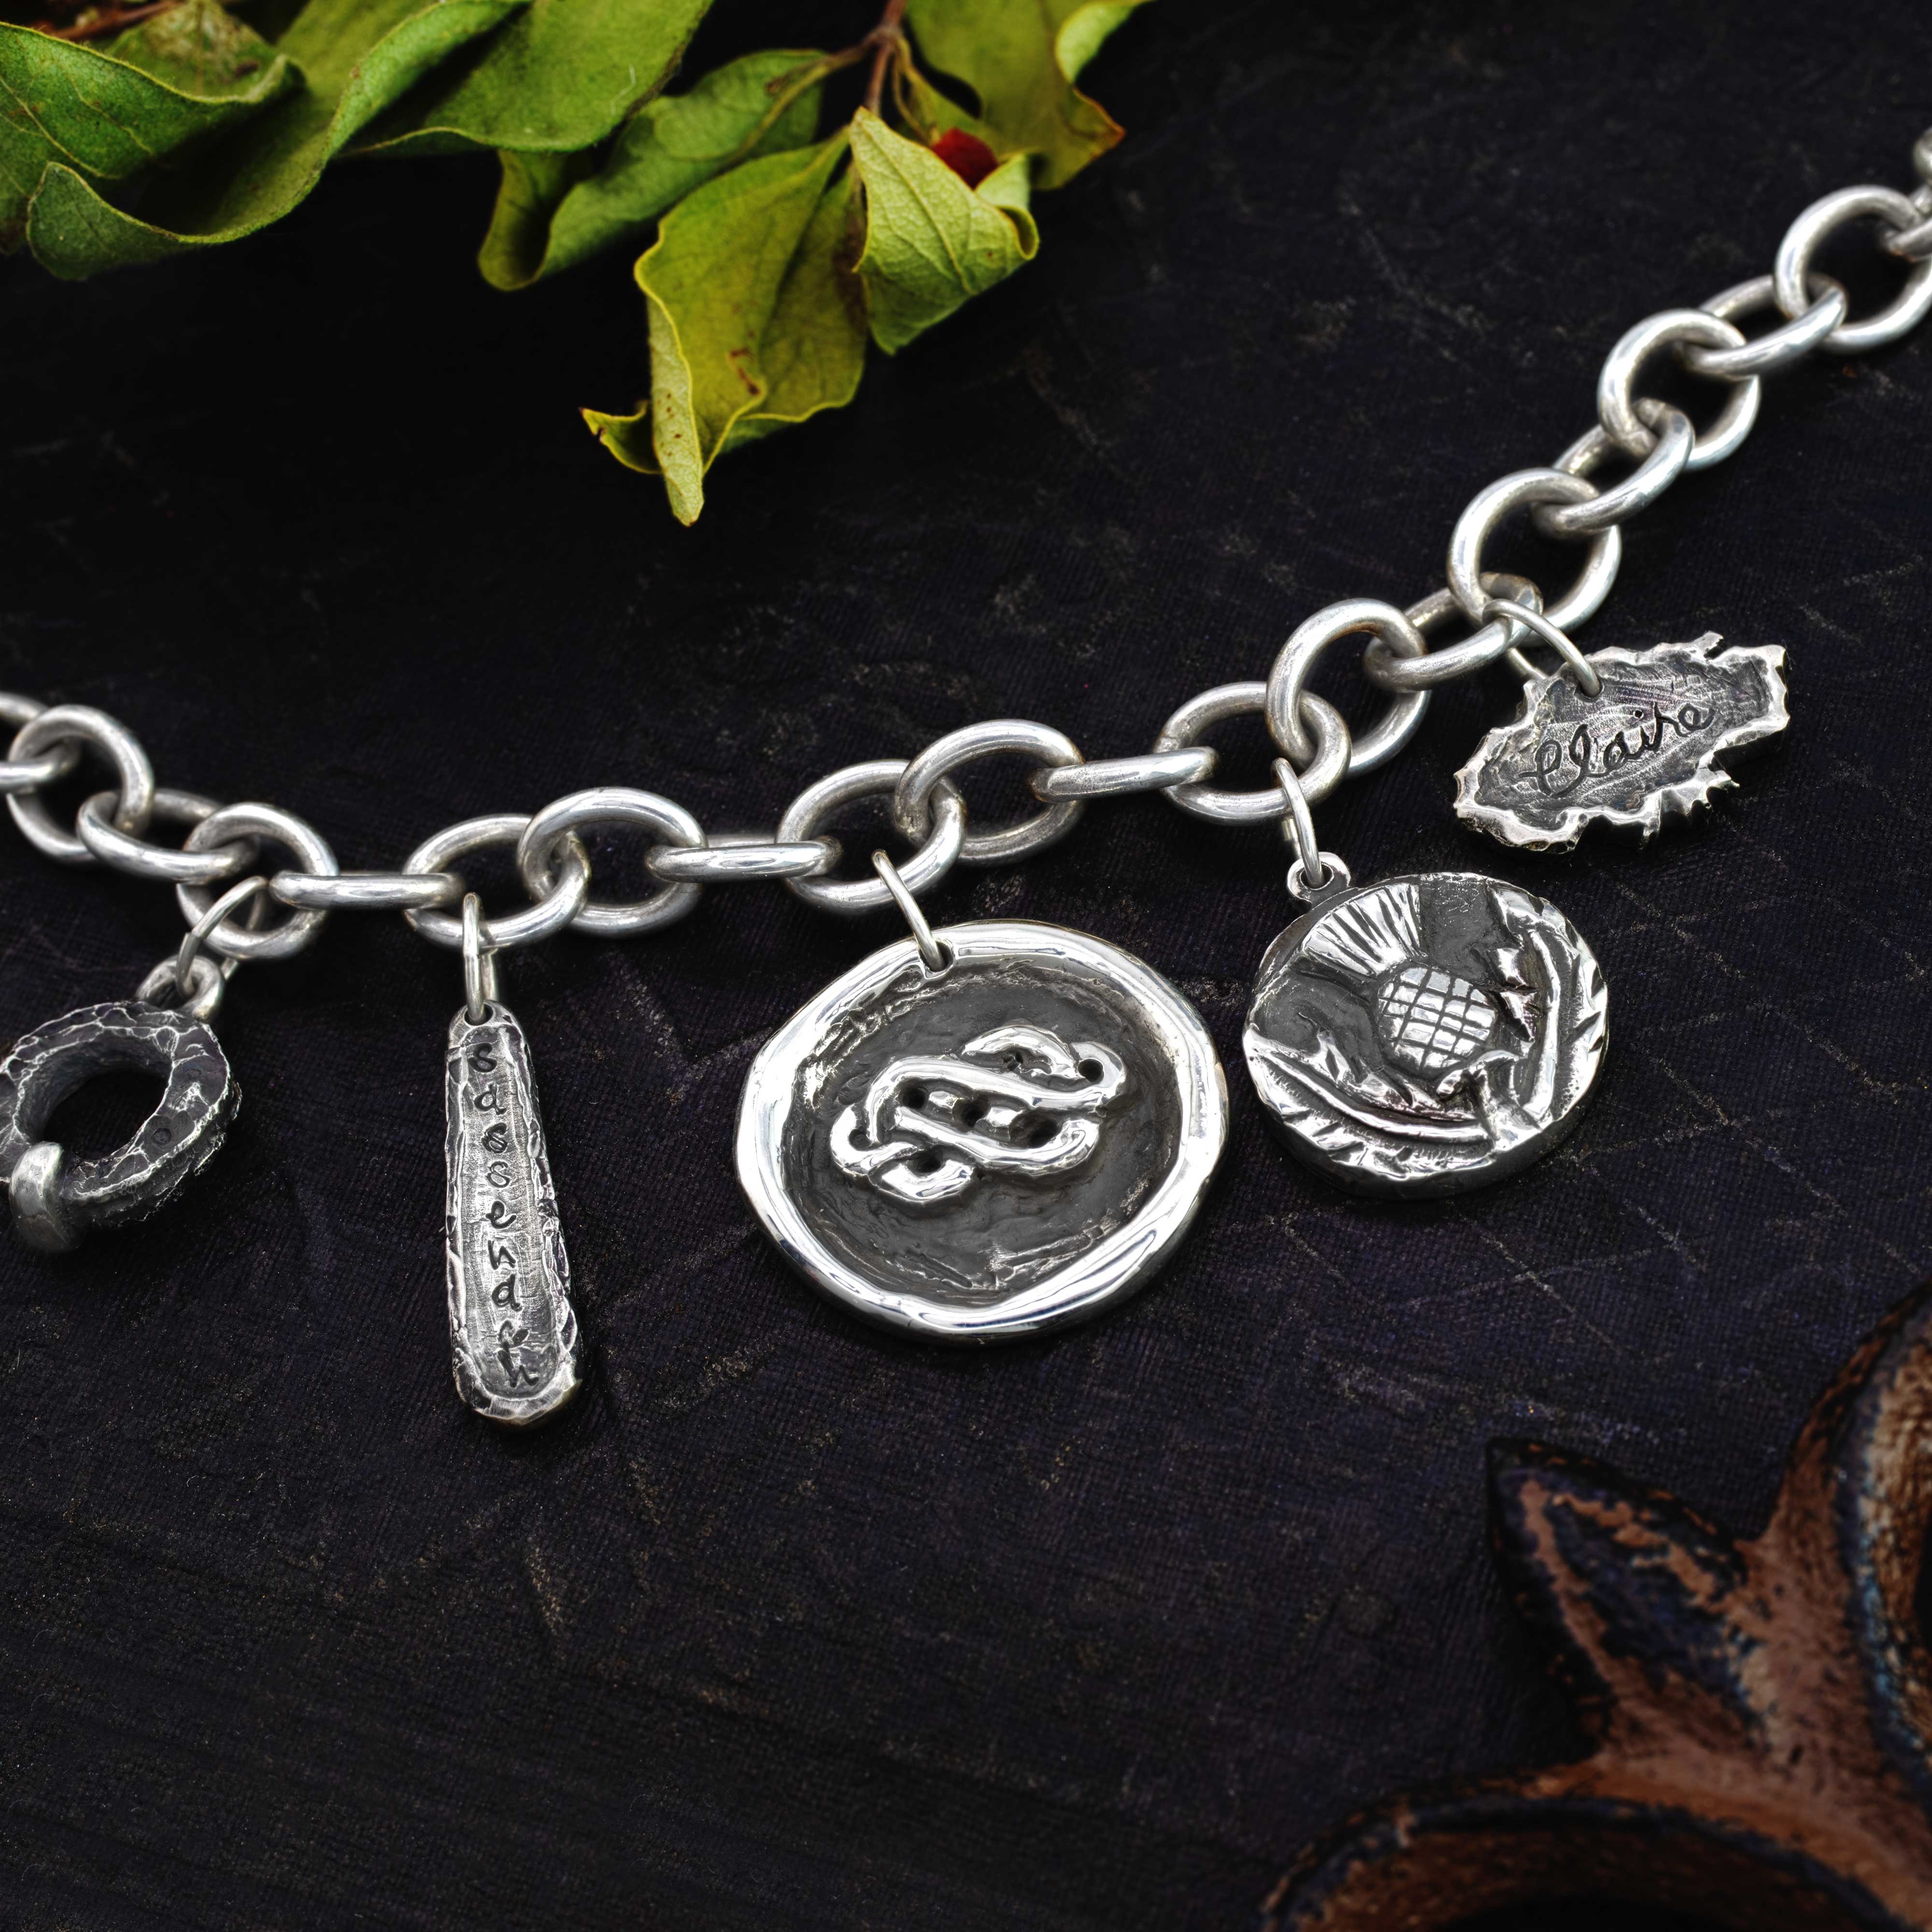 hand crafted silver charms on a sterling silver charm bracelet, the charms feature thistle designs, celtic knots, historical, and  ripped parchment styling